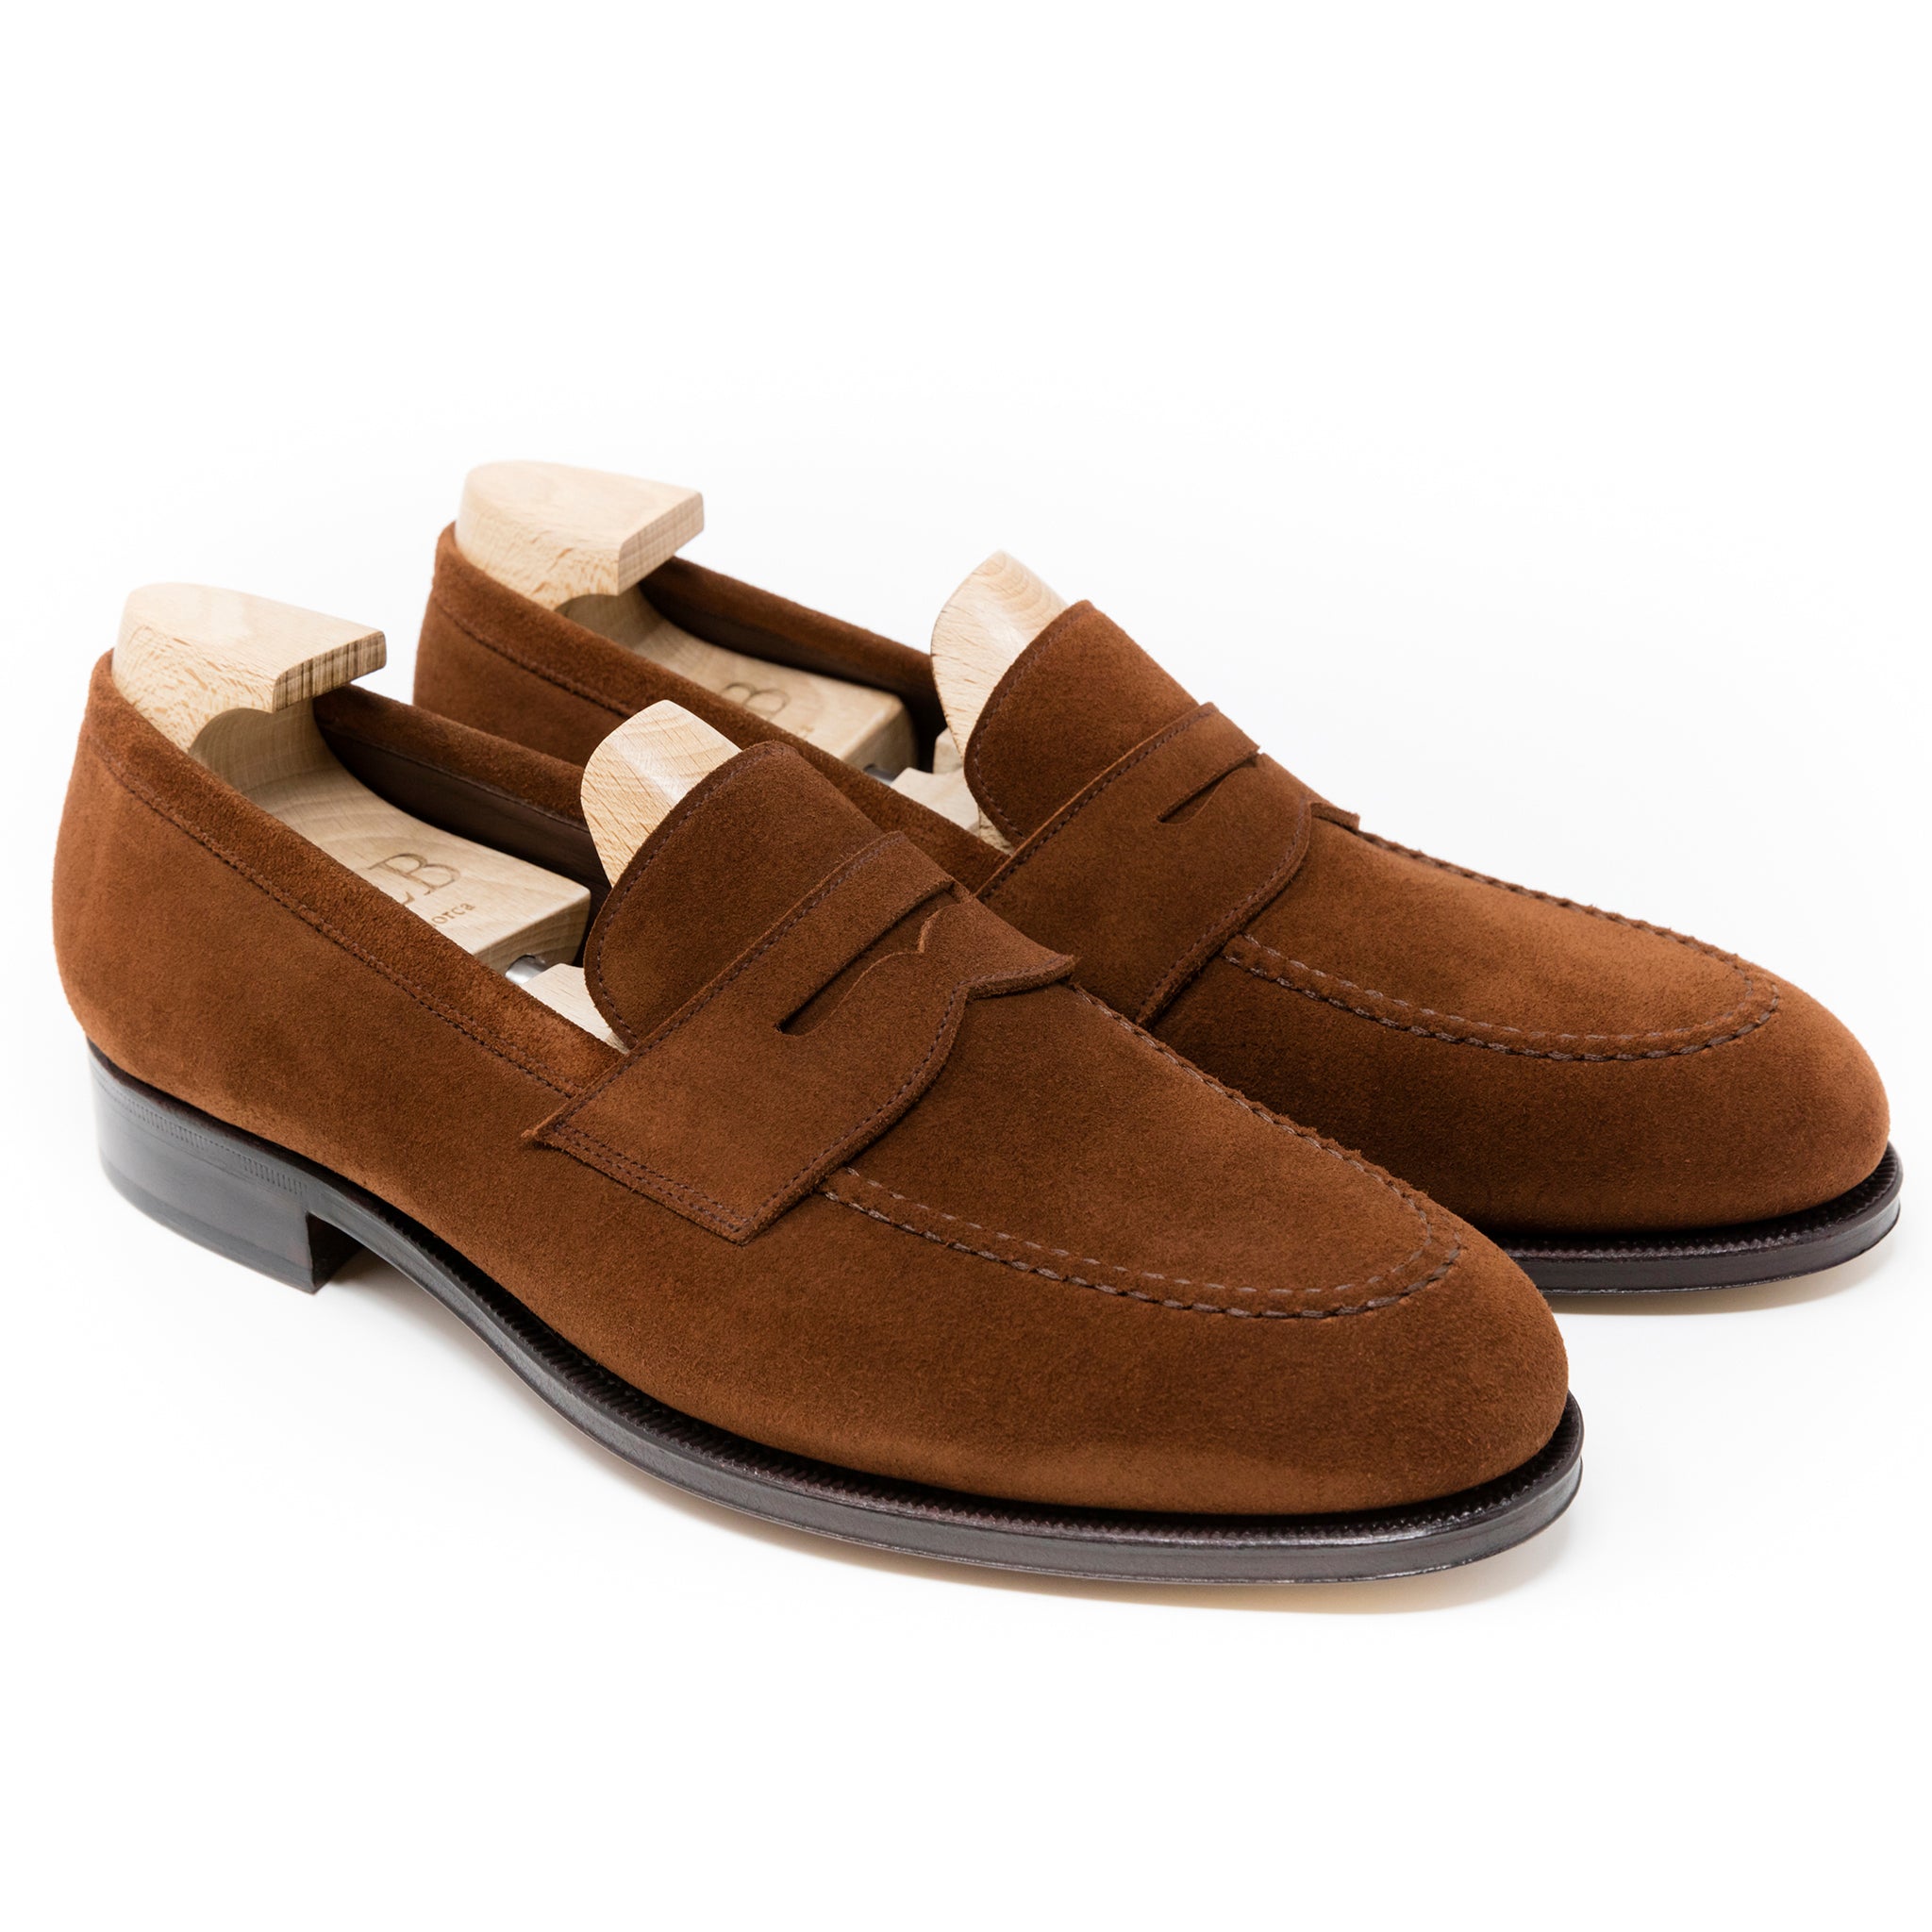 TLB Mallorca | Leather loafers | Jones Suede Polo Brown model 545